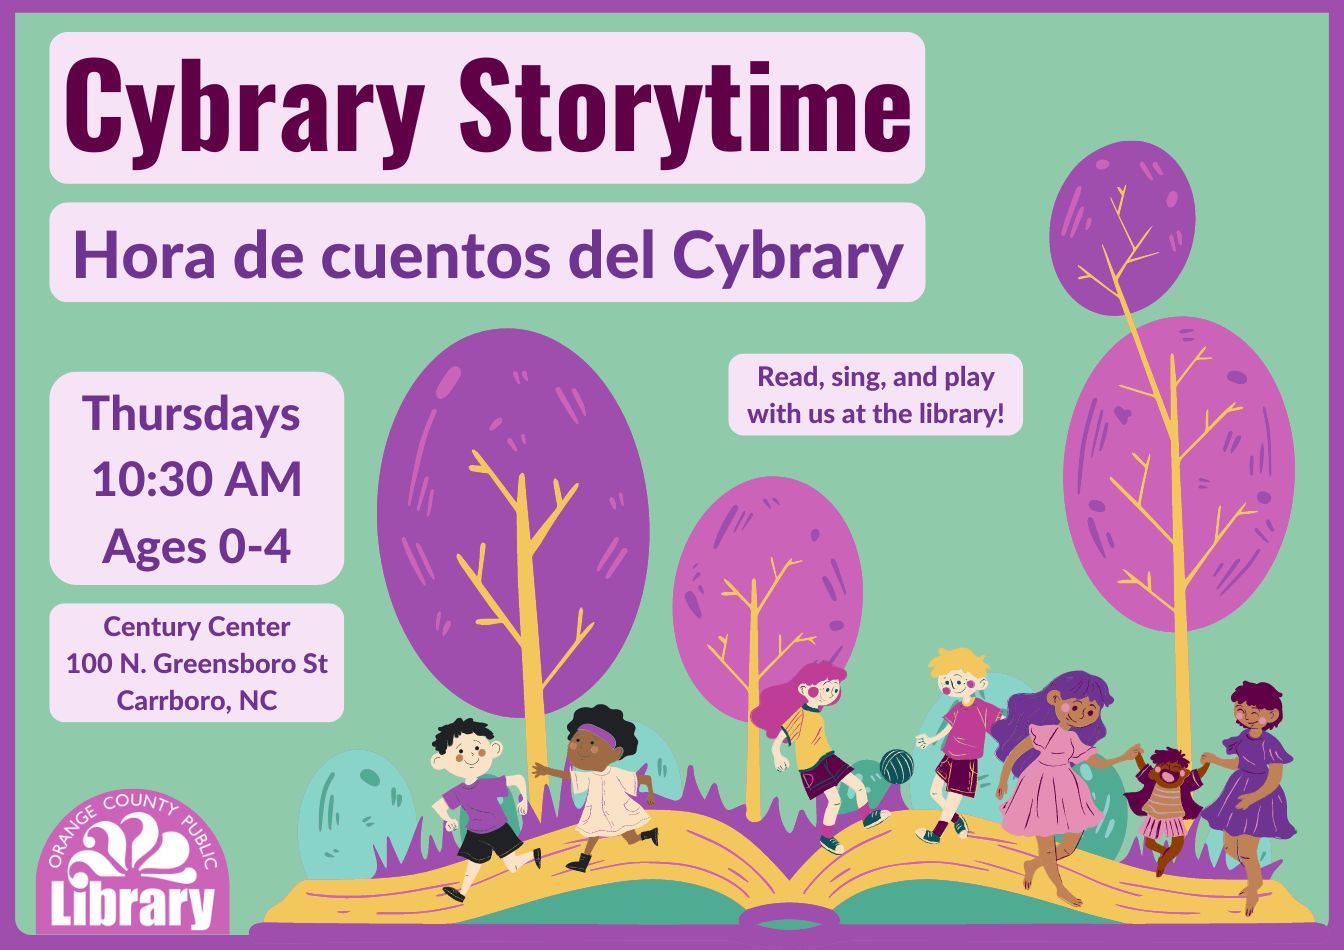 green flier with purple trees and children over an open book. text: cybrary storytime thursdays, 10:30, ages 0-4 Read, sing, and play with us at the library!